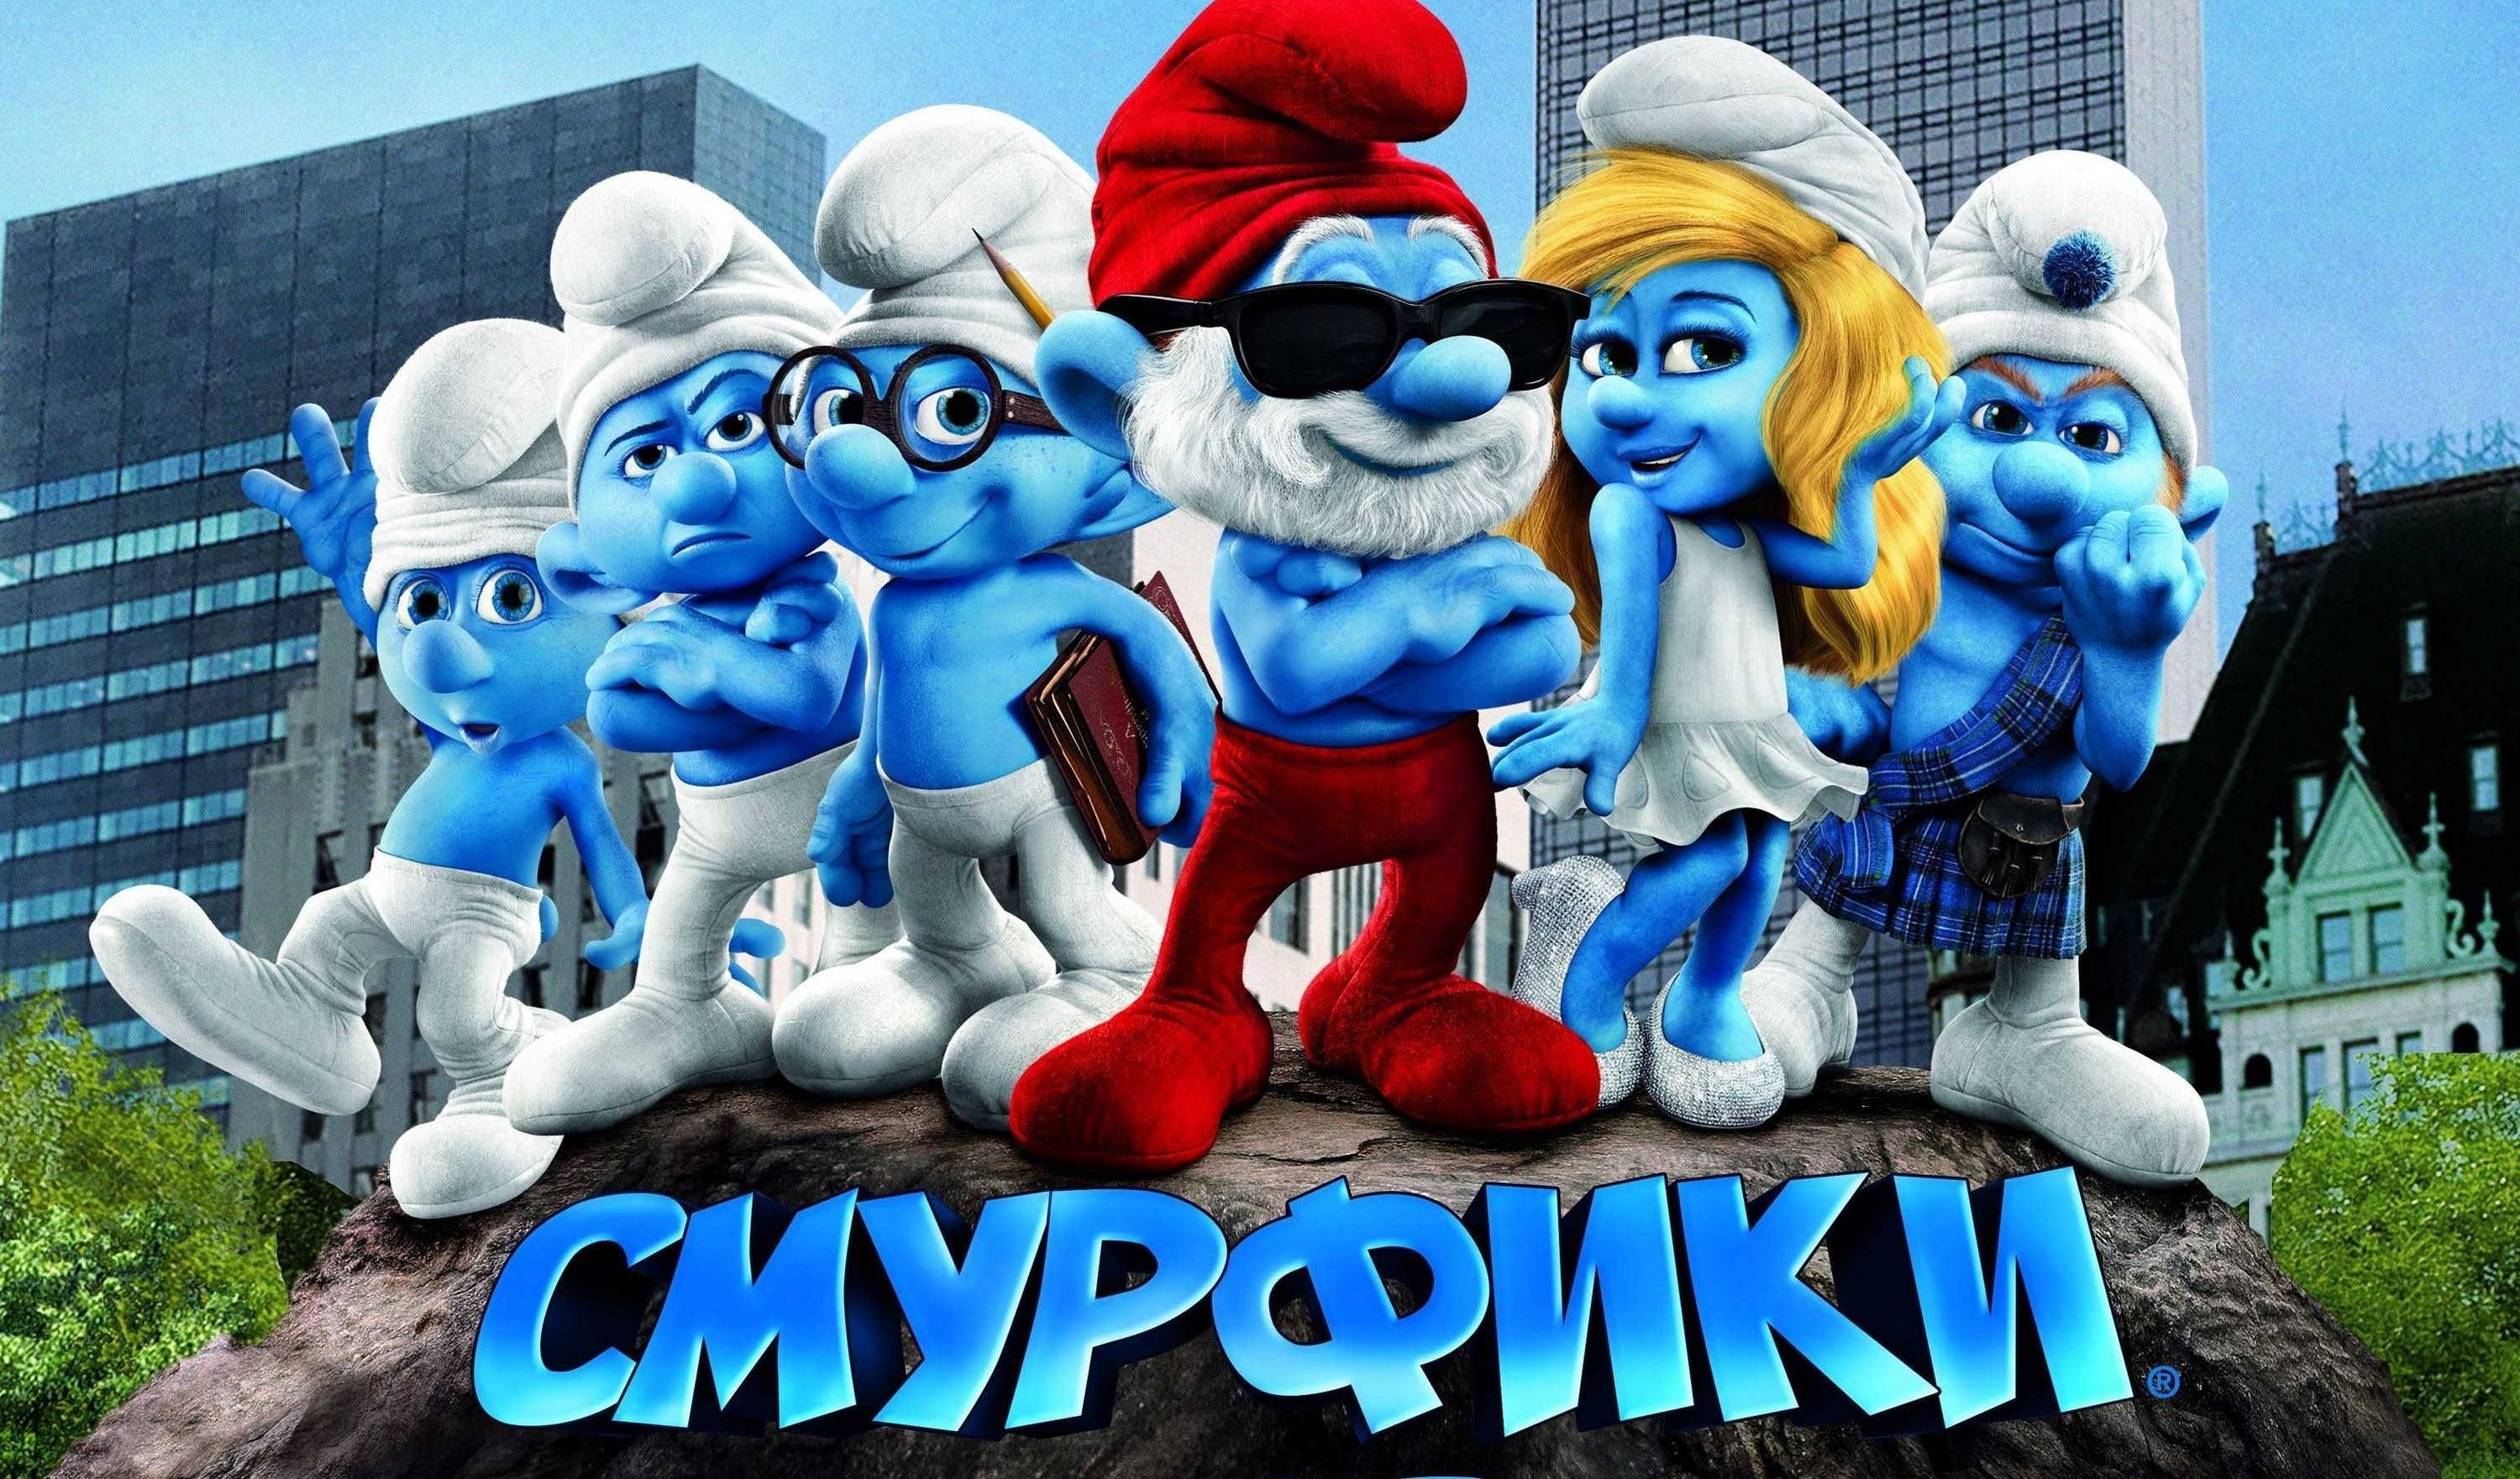 3000x1761 The Smurfs wallpapers and images - wallpapers, pictures, photos